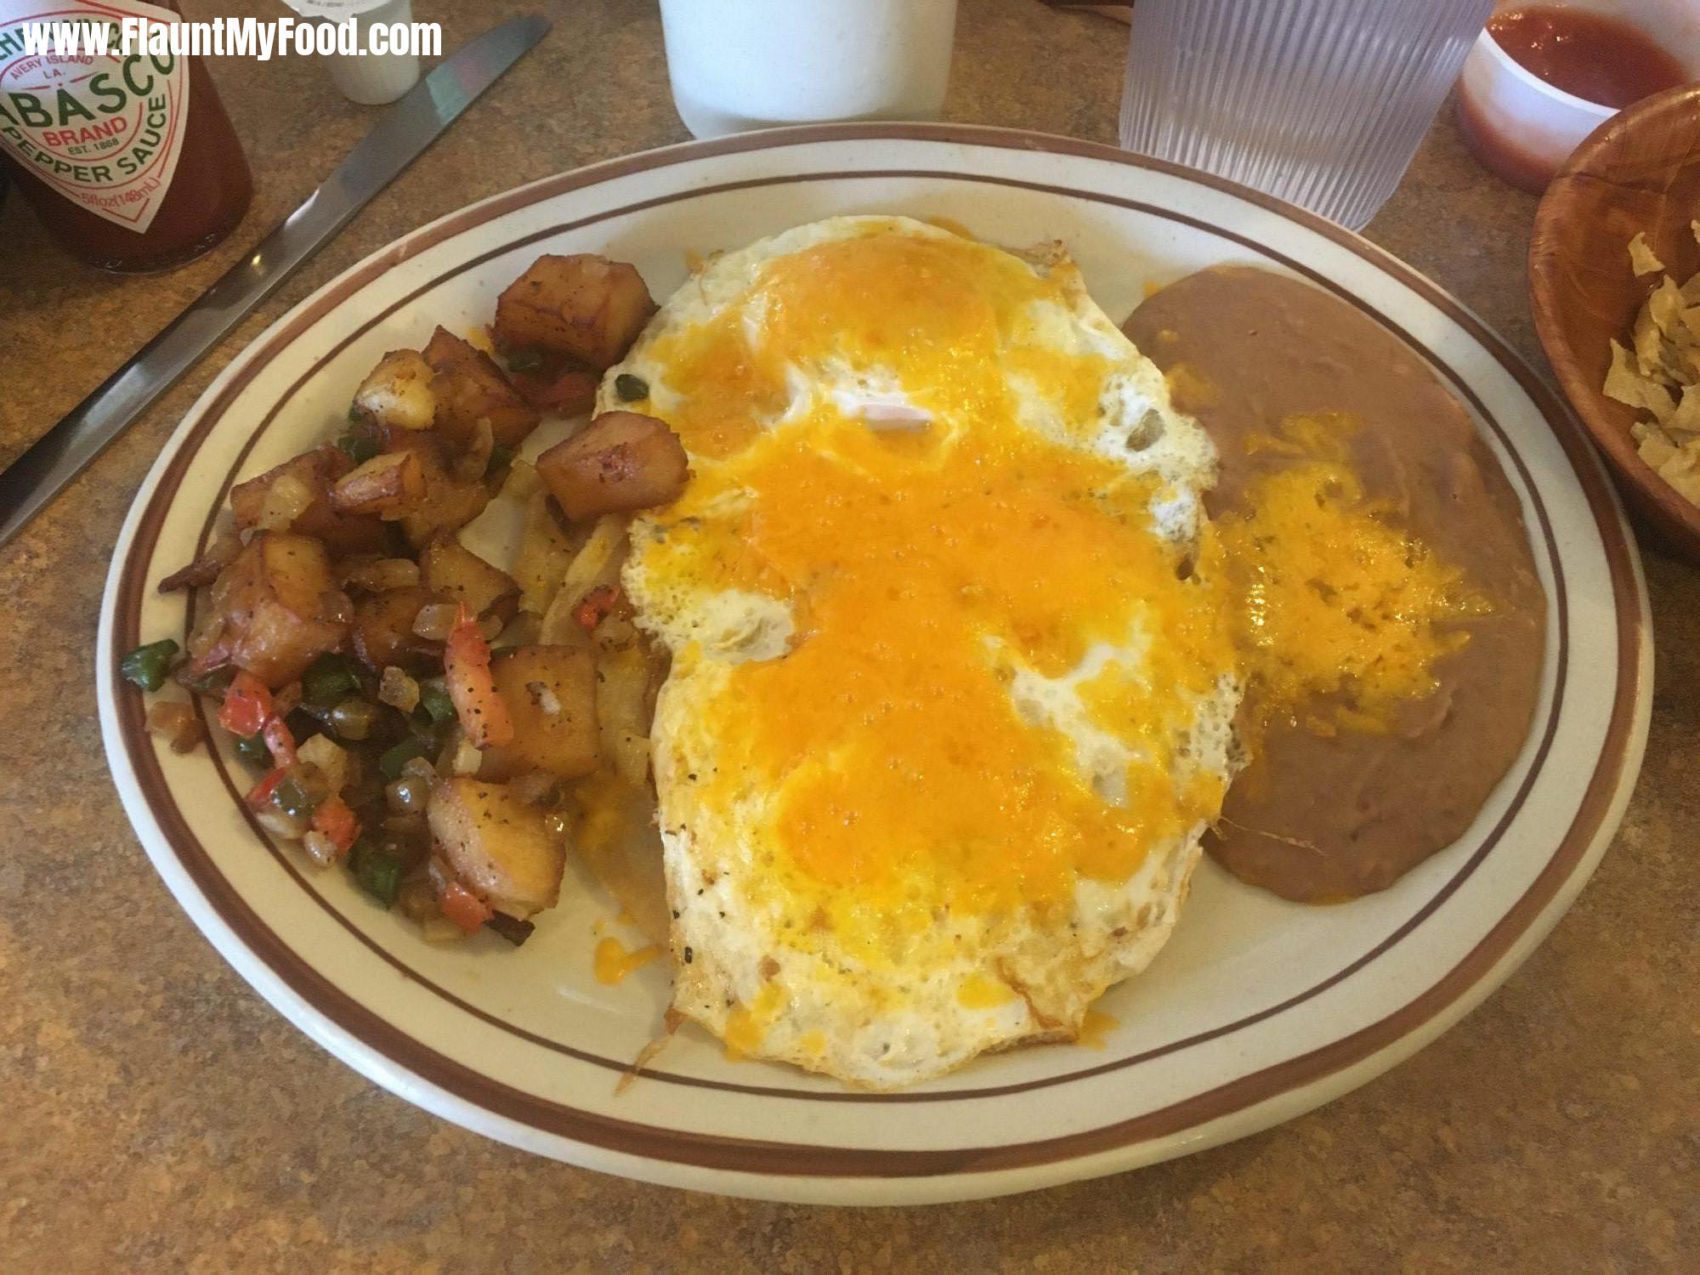 Eggs Potatoes and Veggies New Mexican Breakfast!Eggs Potatoes and Veggies New Mexican Breakfast!